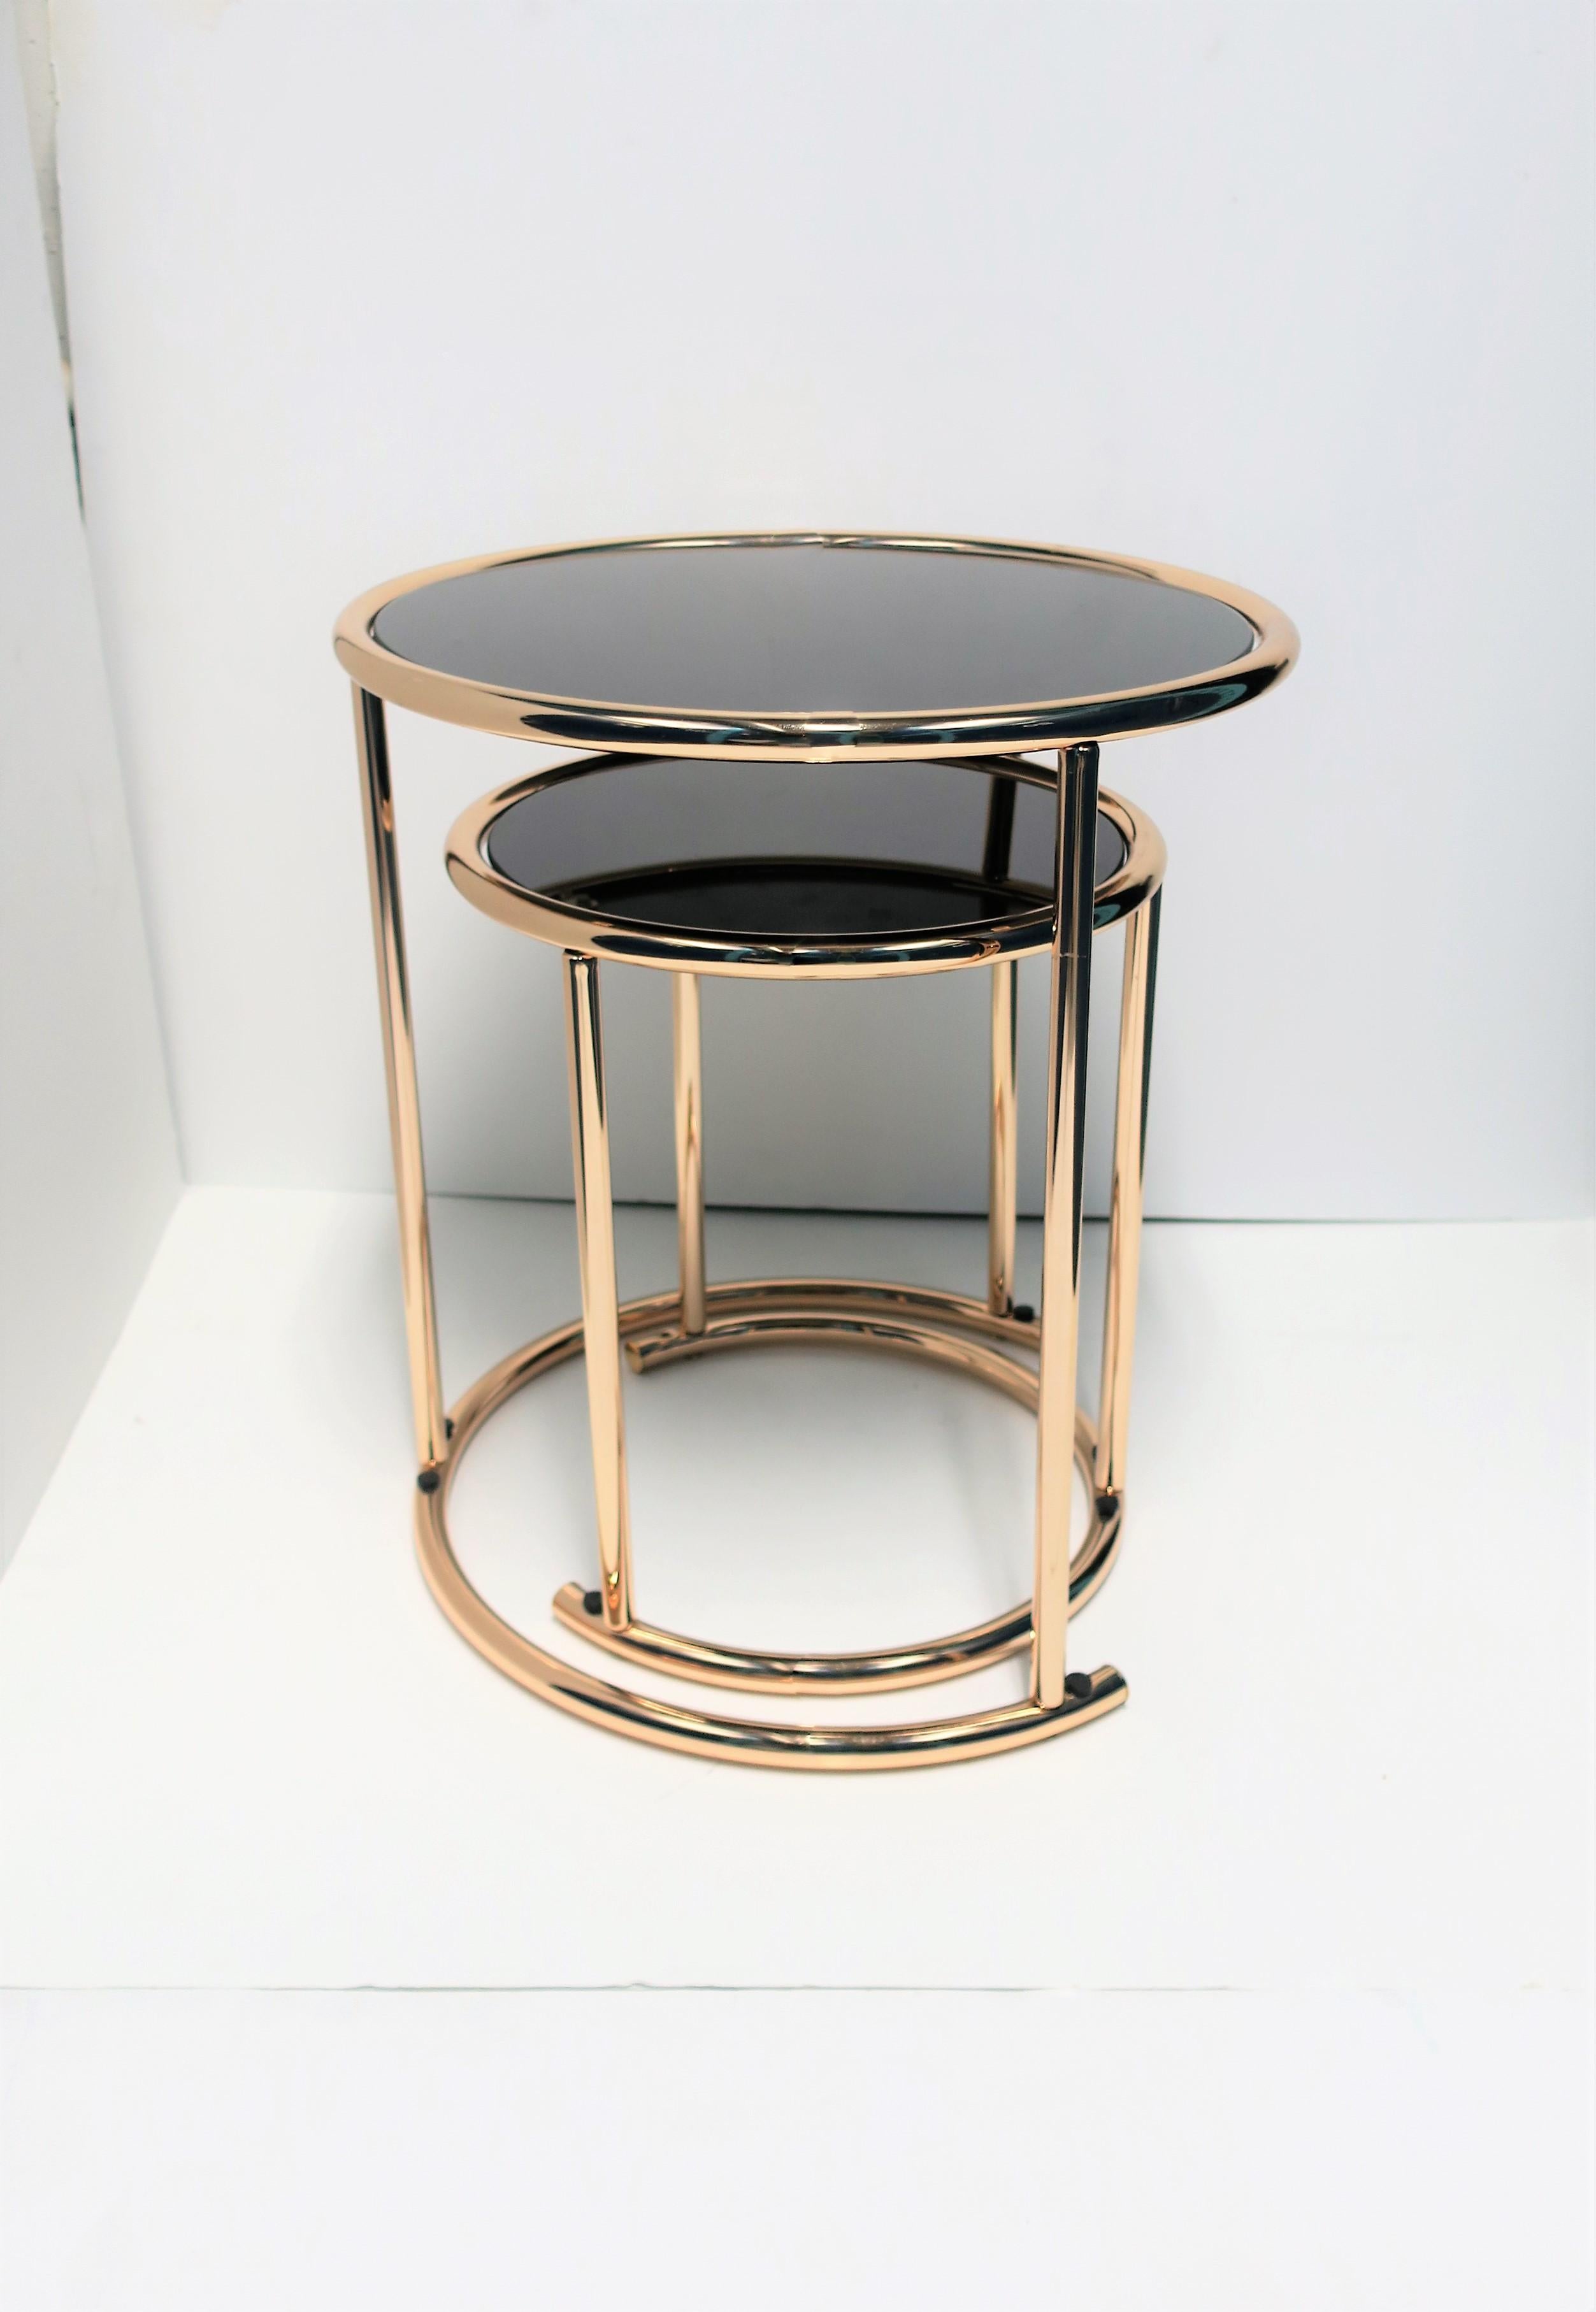 A chic set of 2 Modern style round side/nesting tables with a tubular frame and black mirrored glass tops. Table frames are a brass/rose gold hue plated metal; a great combination with the black mirrored glass tops as show in images. 

Measurements: